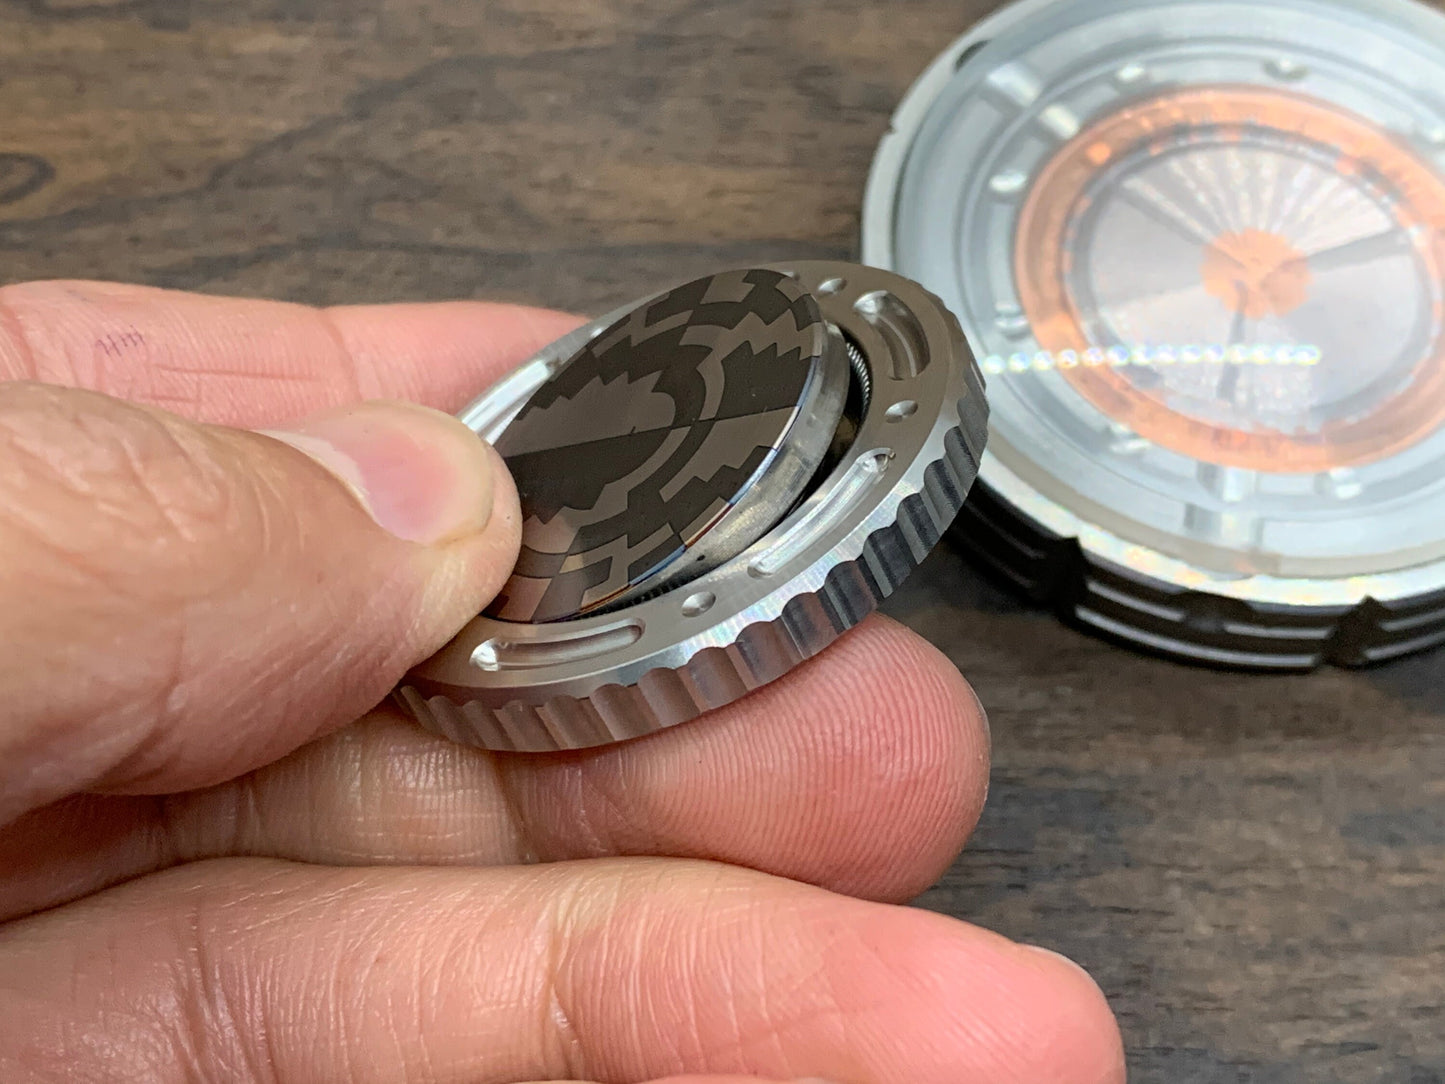 Strobe effects Titanium Coin for Billetspin Gambit (only Coin included)